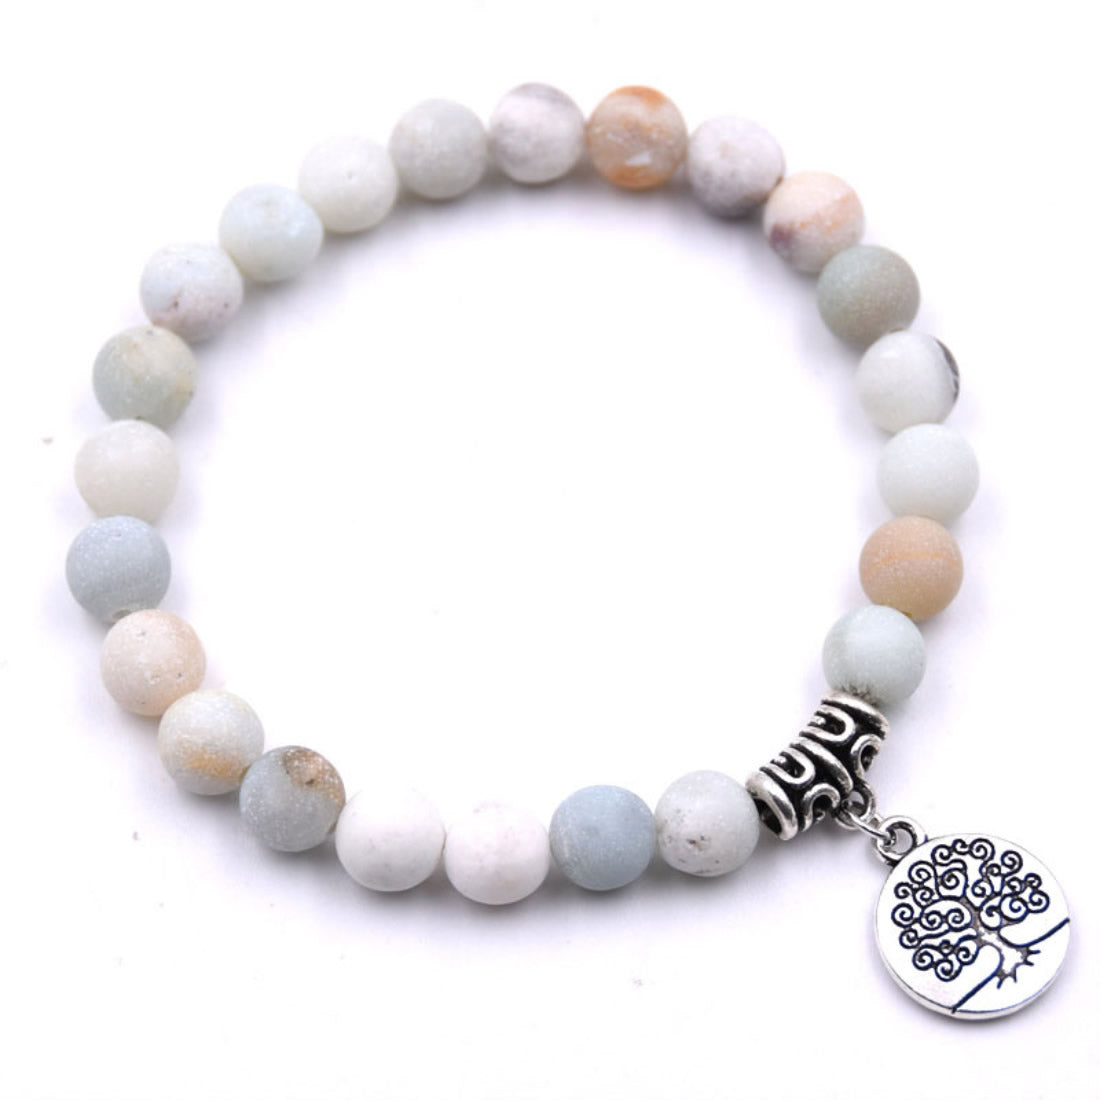 Amazonite Bracelet - Tree Charm - Antique Silver Plated - Length 7.5 inch - Beads 8 mm